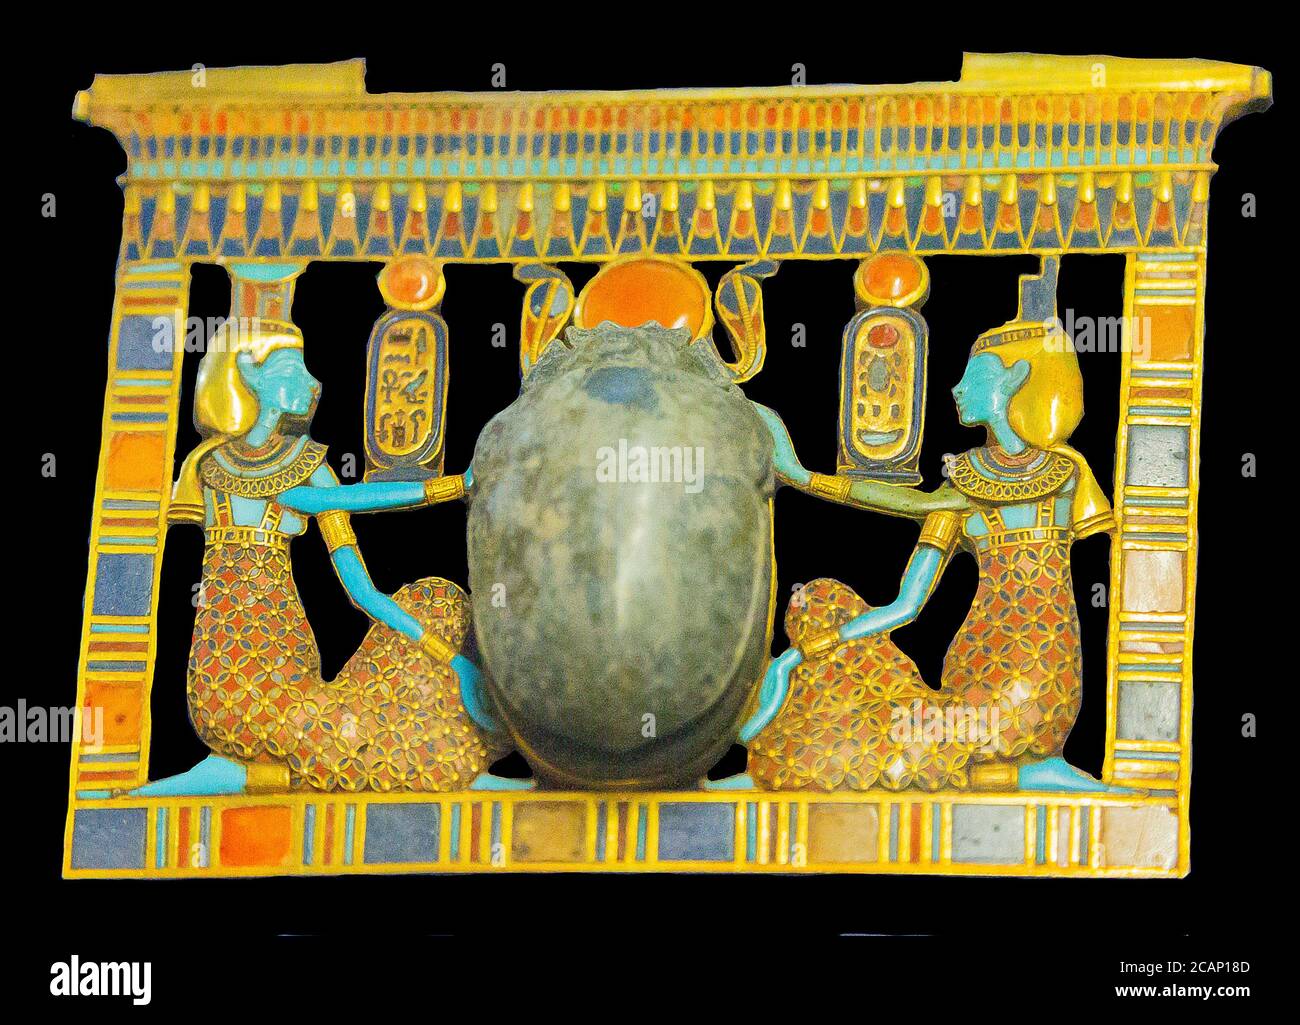 Egypt, Tutankhamon jewellery, from his tomb in Luxor : A pectoral in the shape of a pylon, with the goddesses Isis and Nephthys. Stock Photo